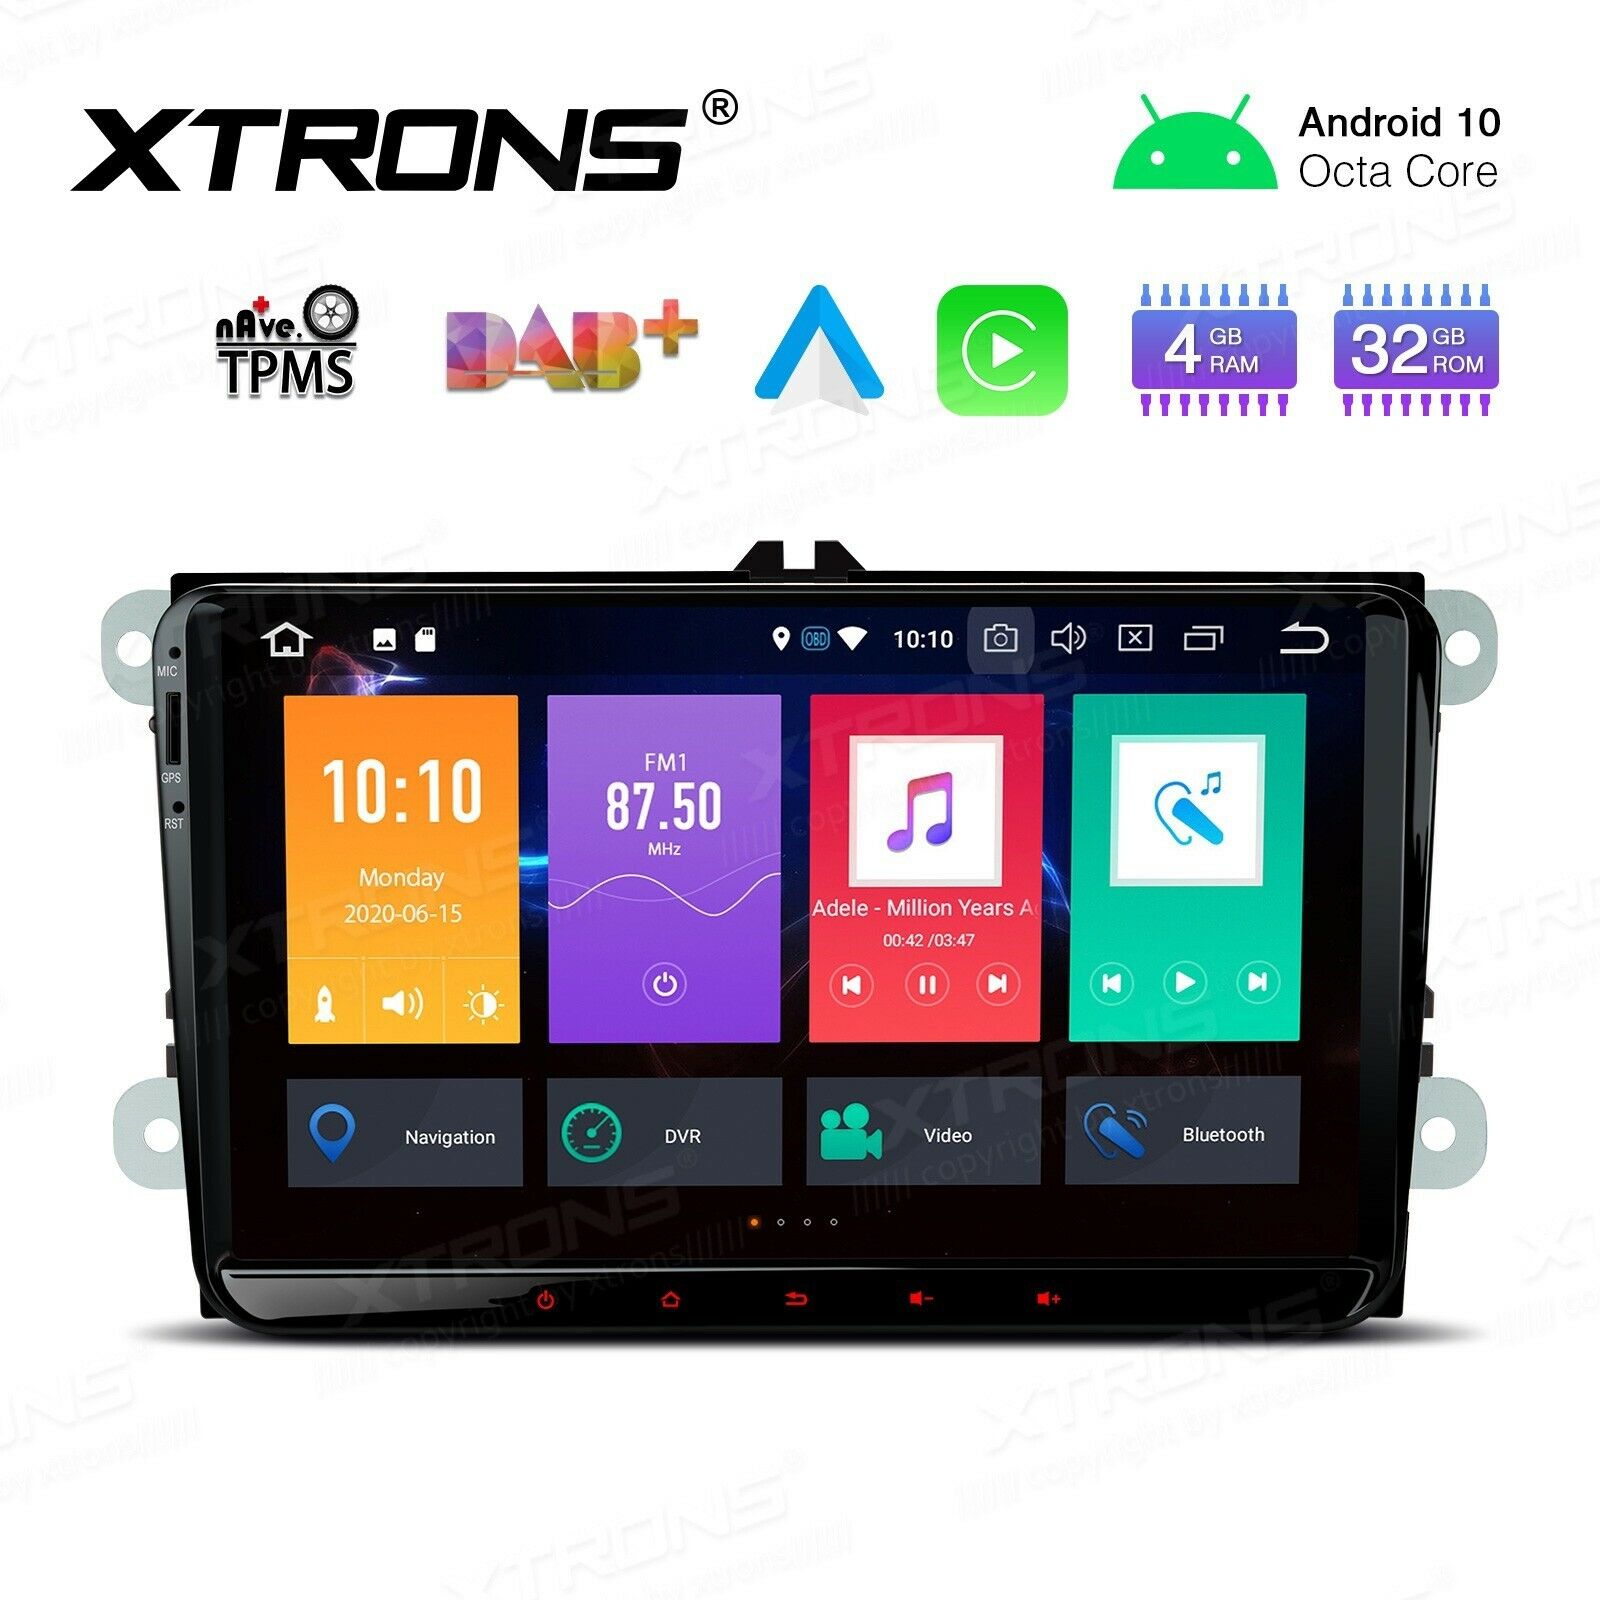 Xtrons Android 10 Quad Core Stereo (Copy)